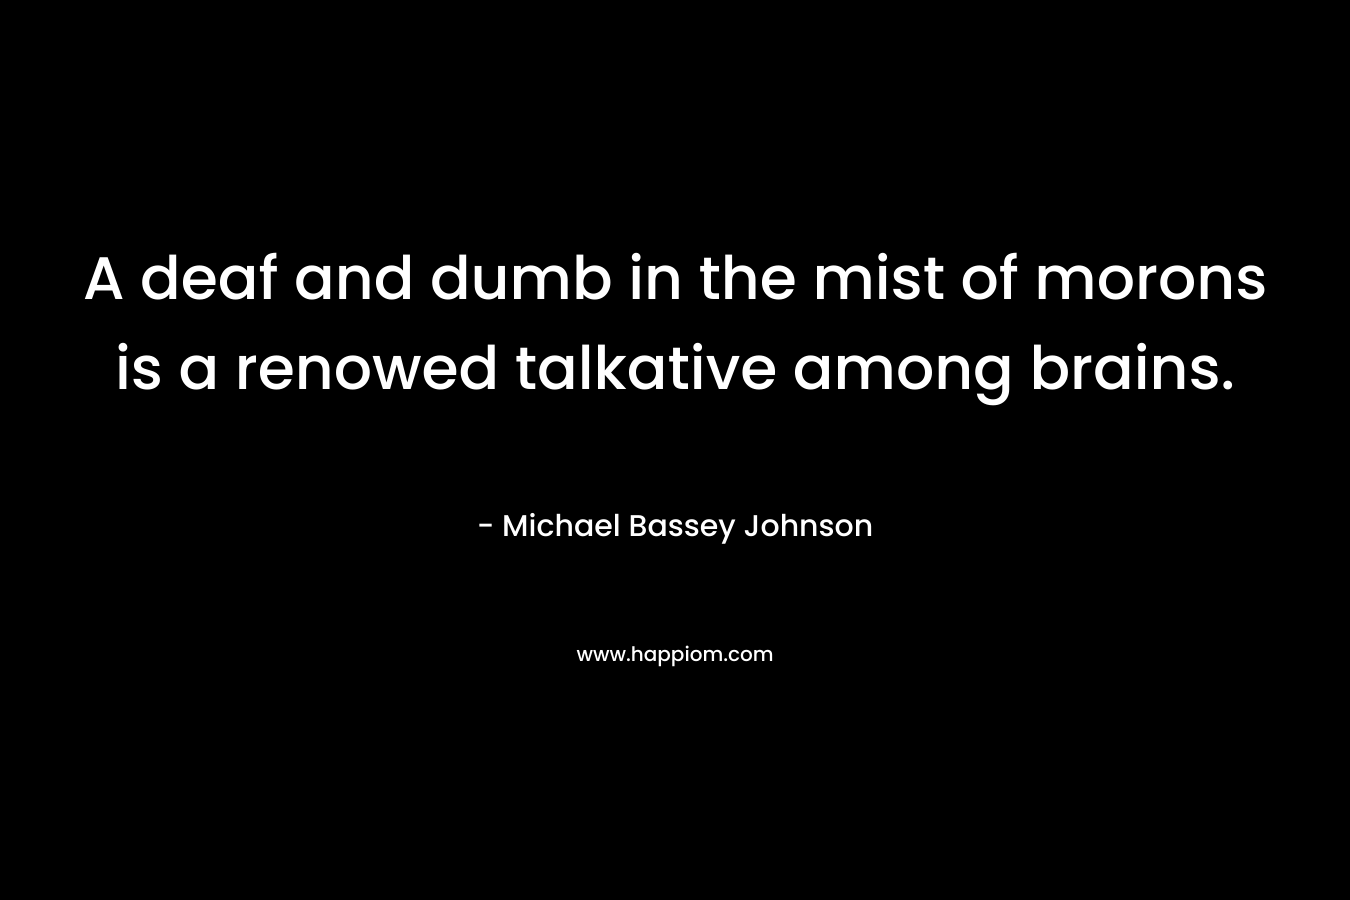 A deaf and dumb in the mist of morons is a renowed talkative among brains. – Michael Bassey Johnson